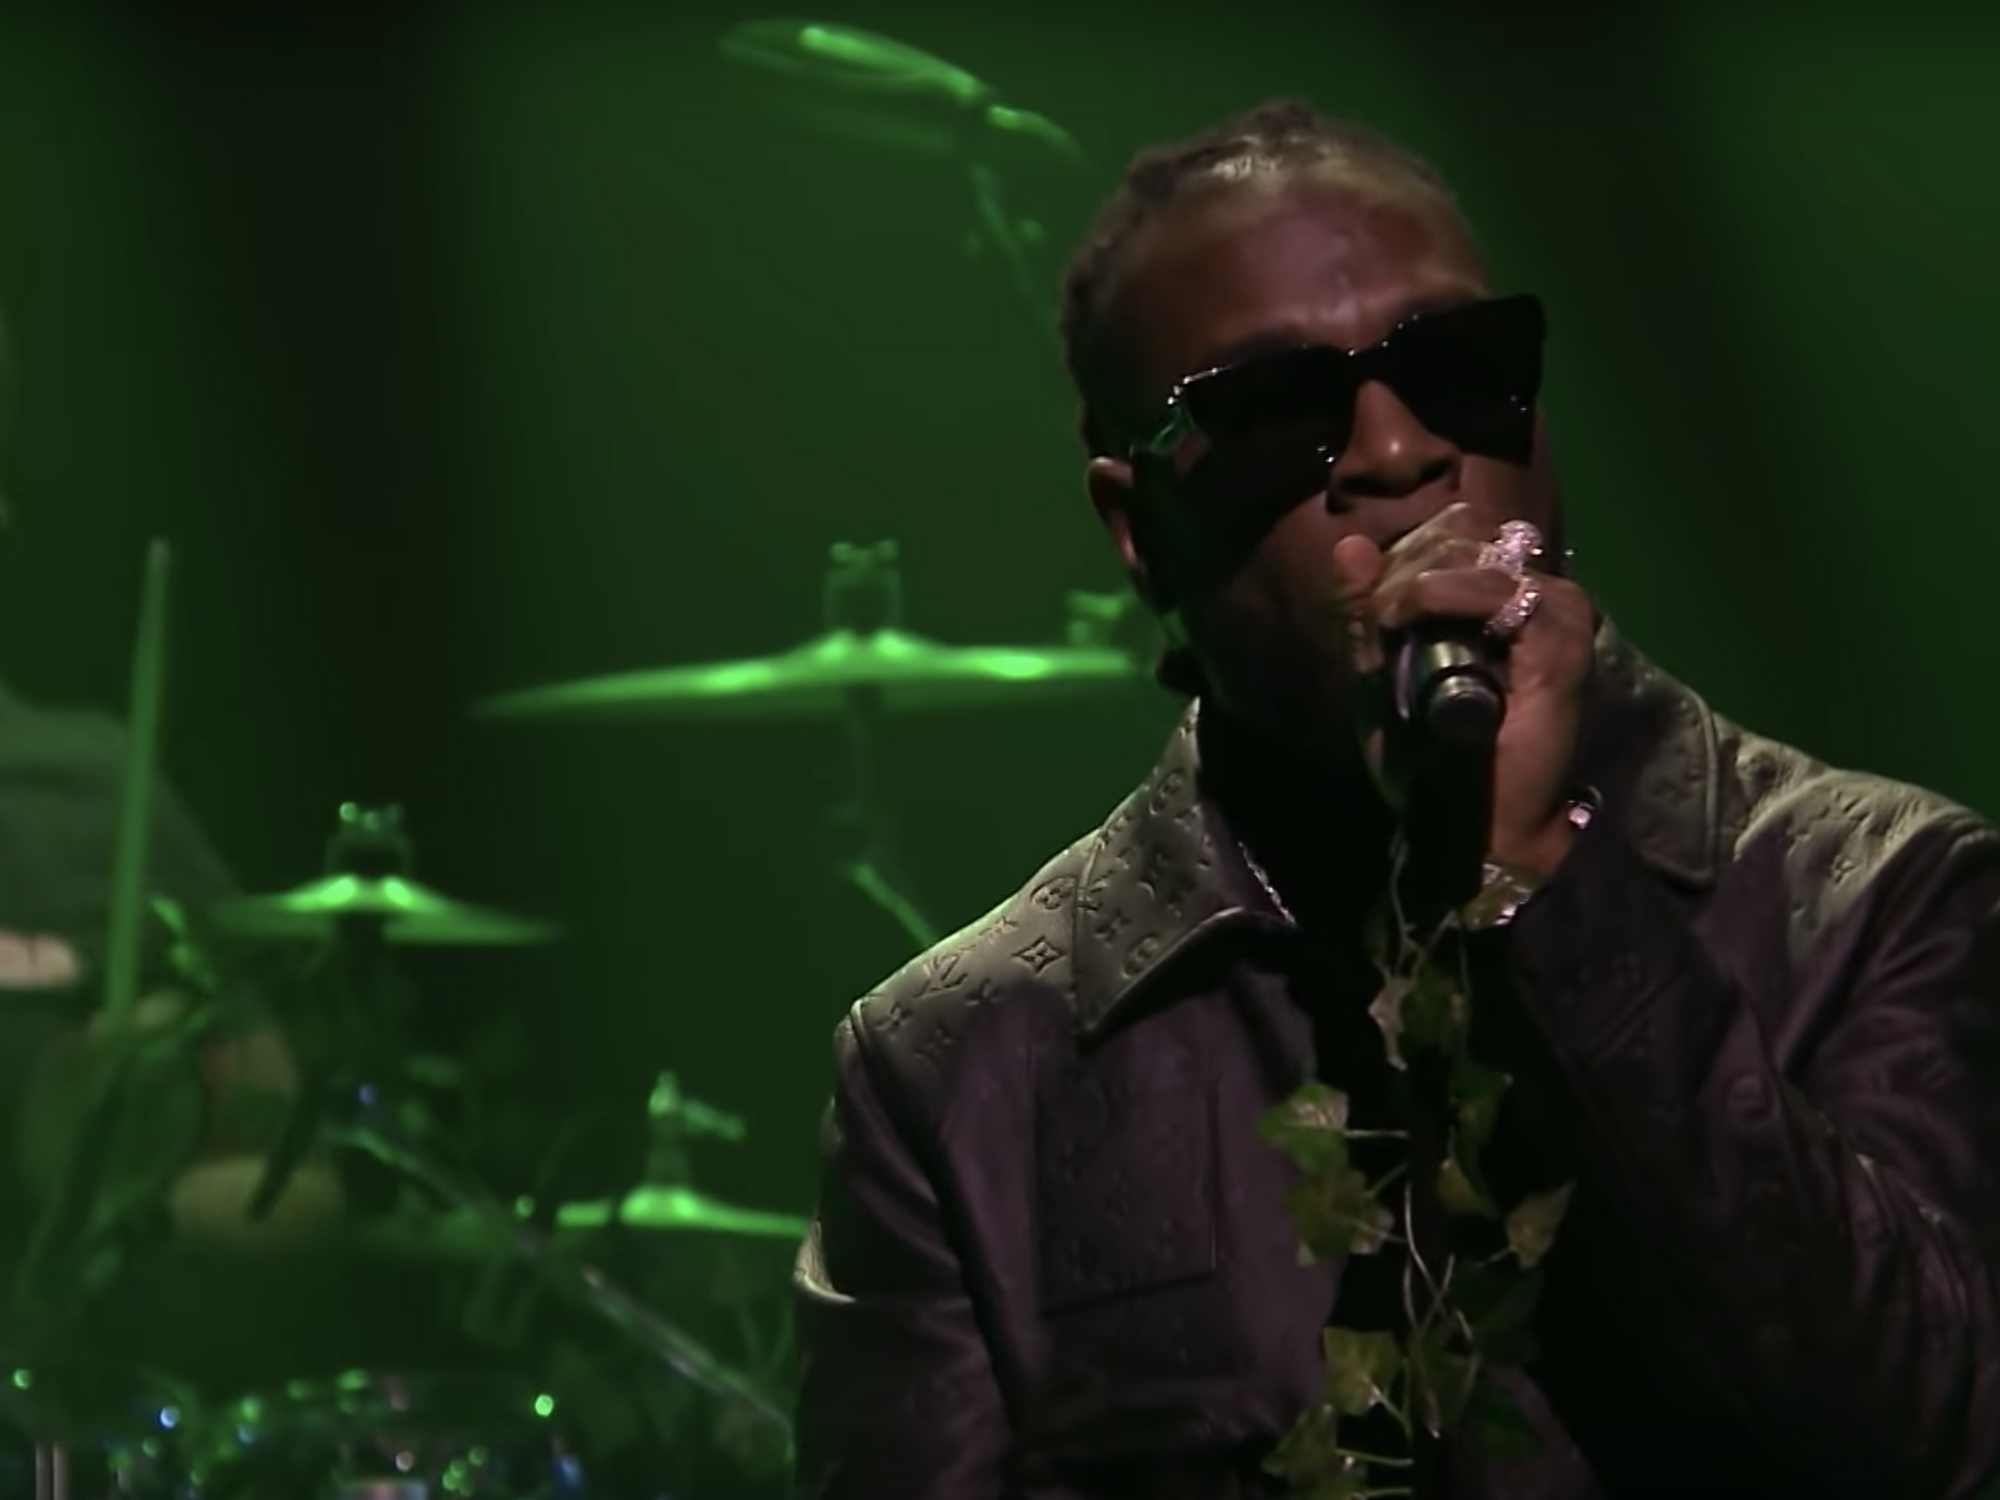 Watch Burna Boy Perform 'Anybody' and 'Collateral Damage' on 'The Tonight Show With Jimmy Fallon'